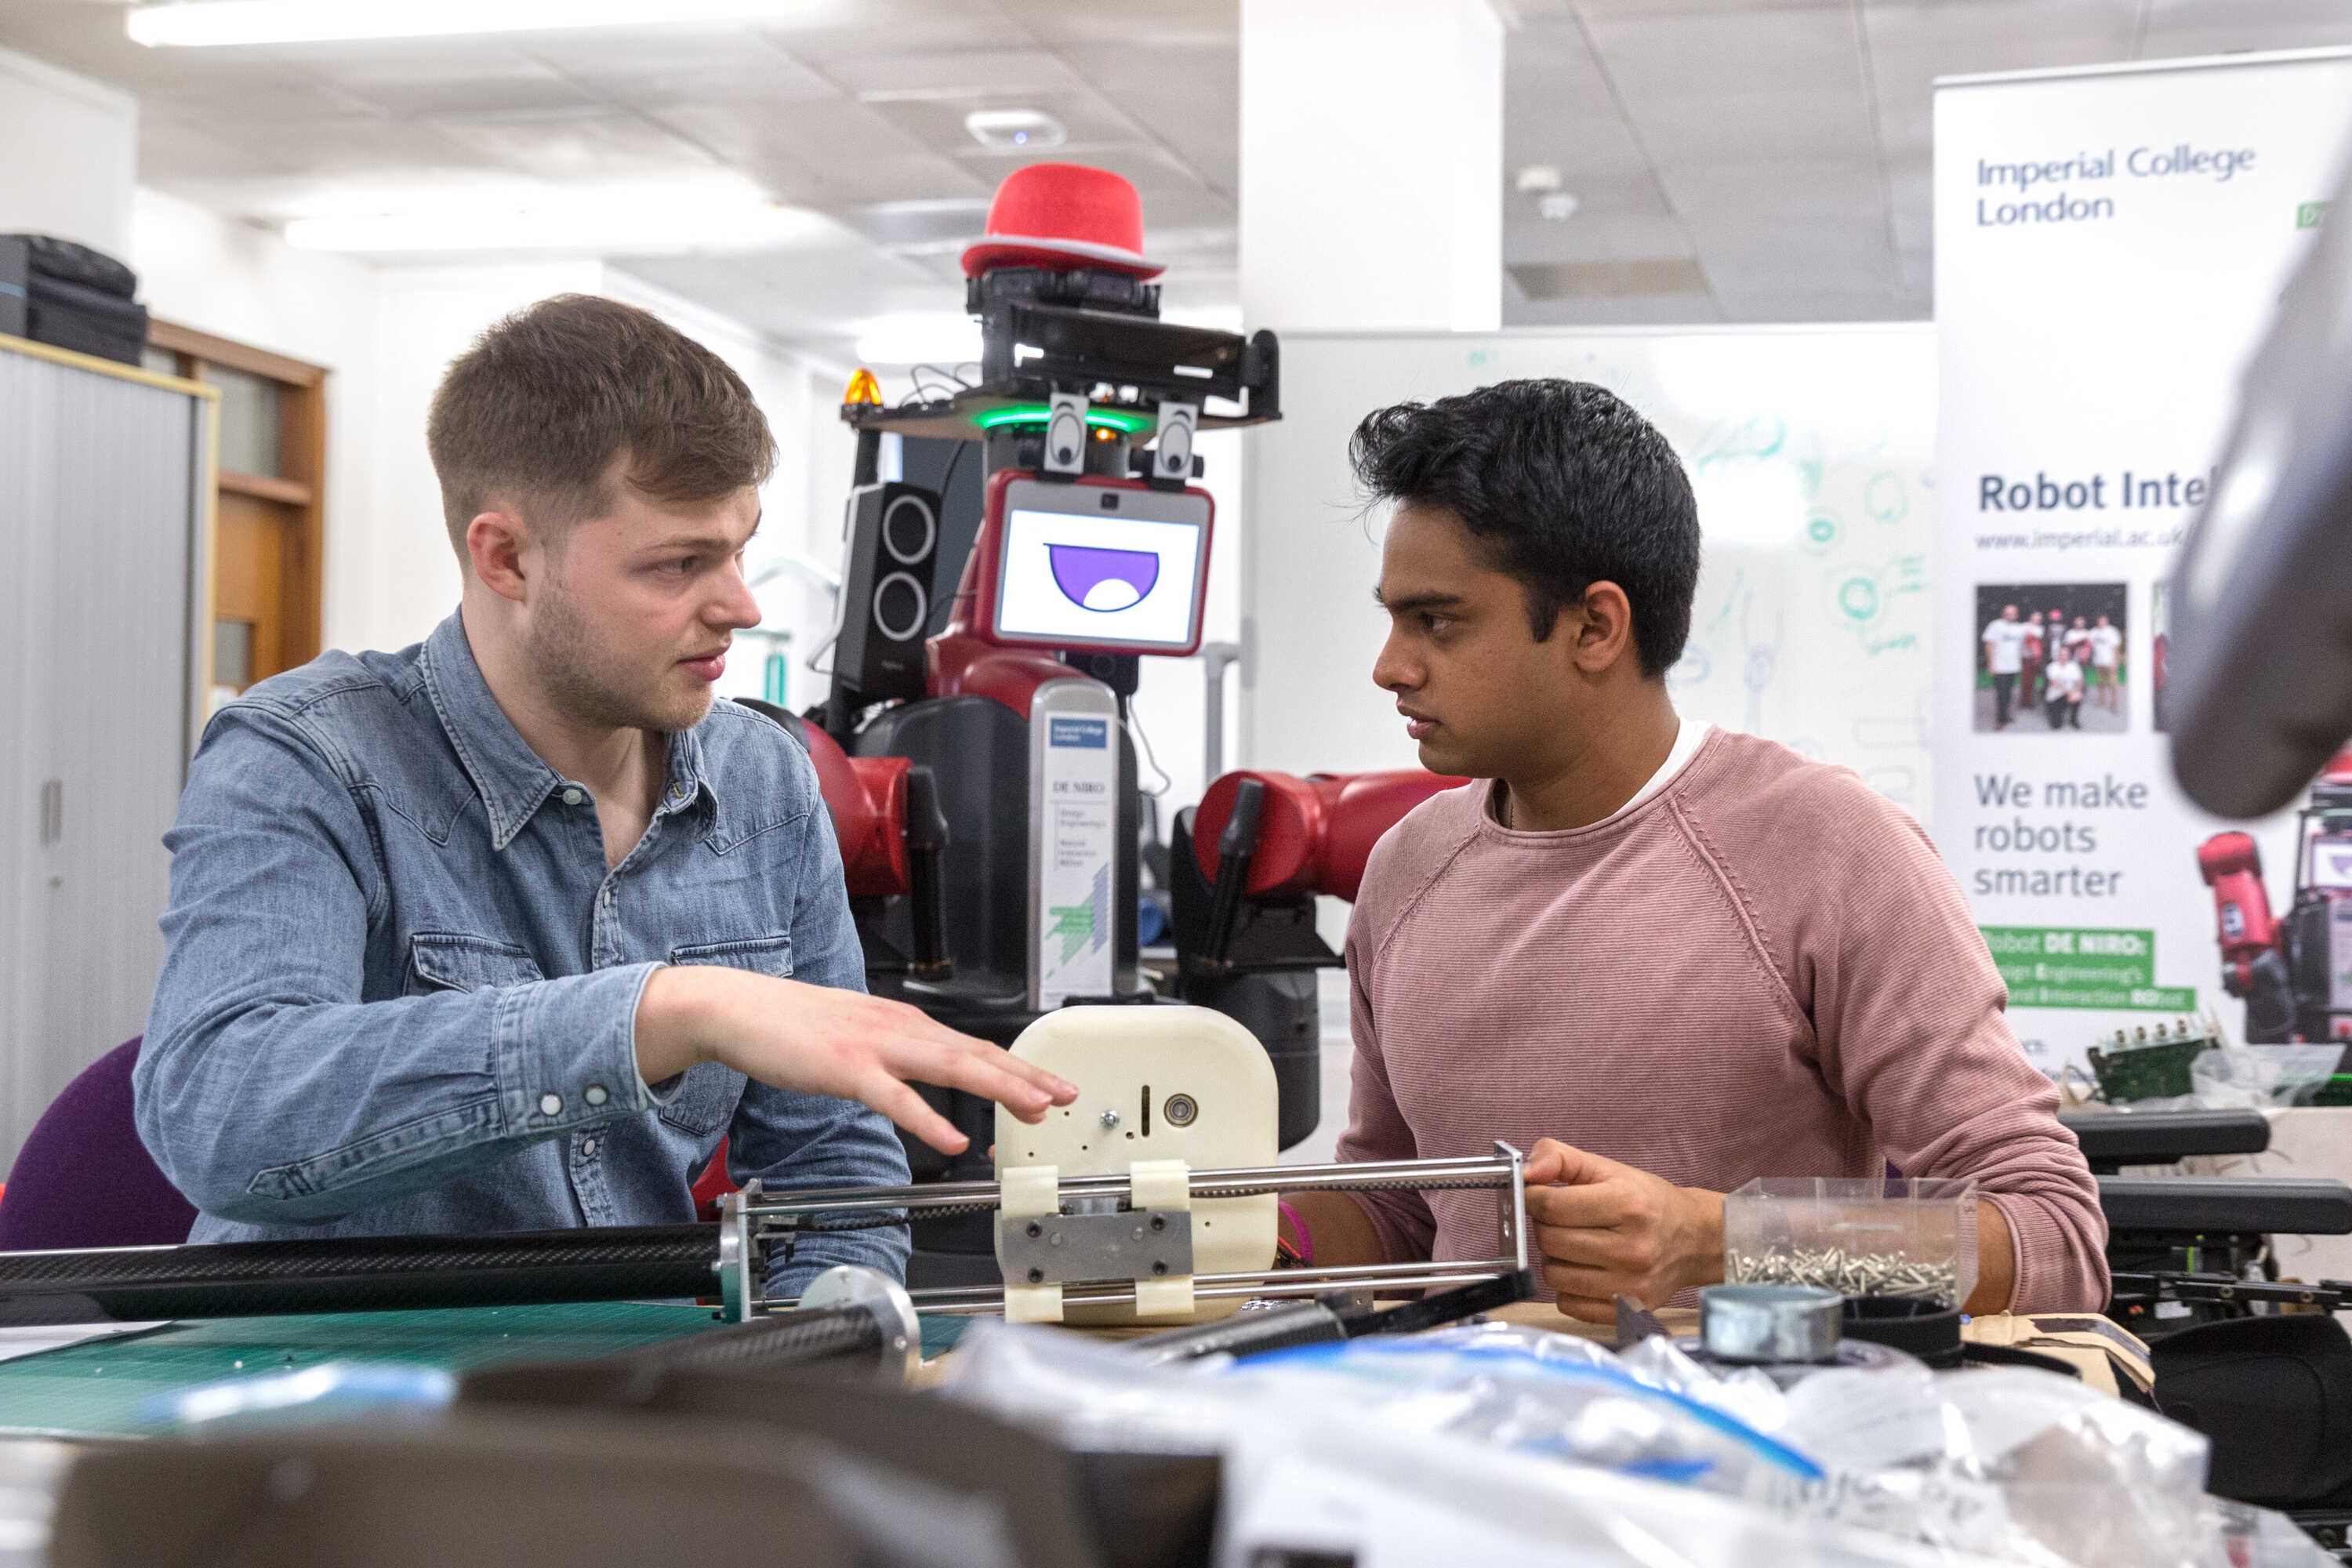 Dyson School of Design Engineering with Robot